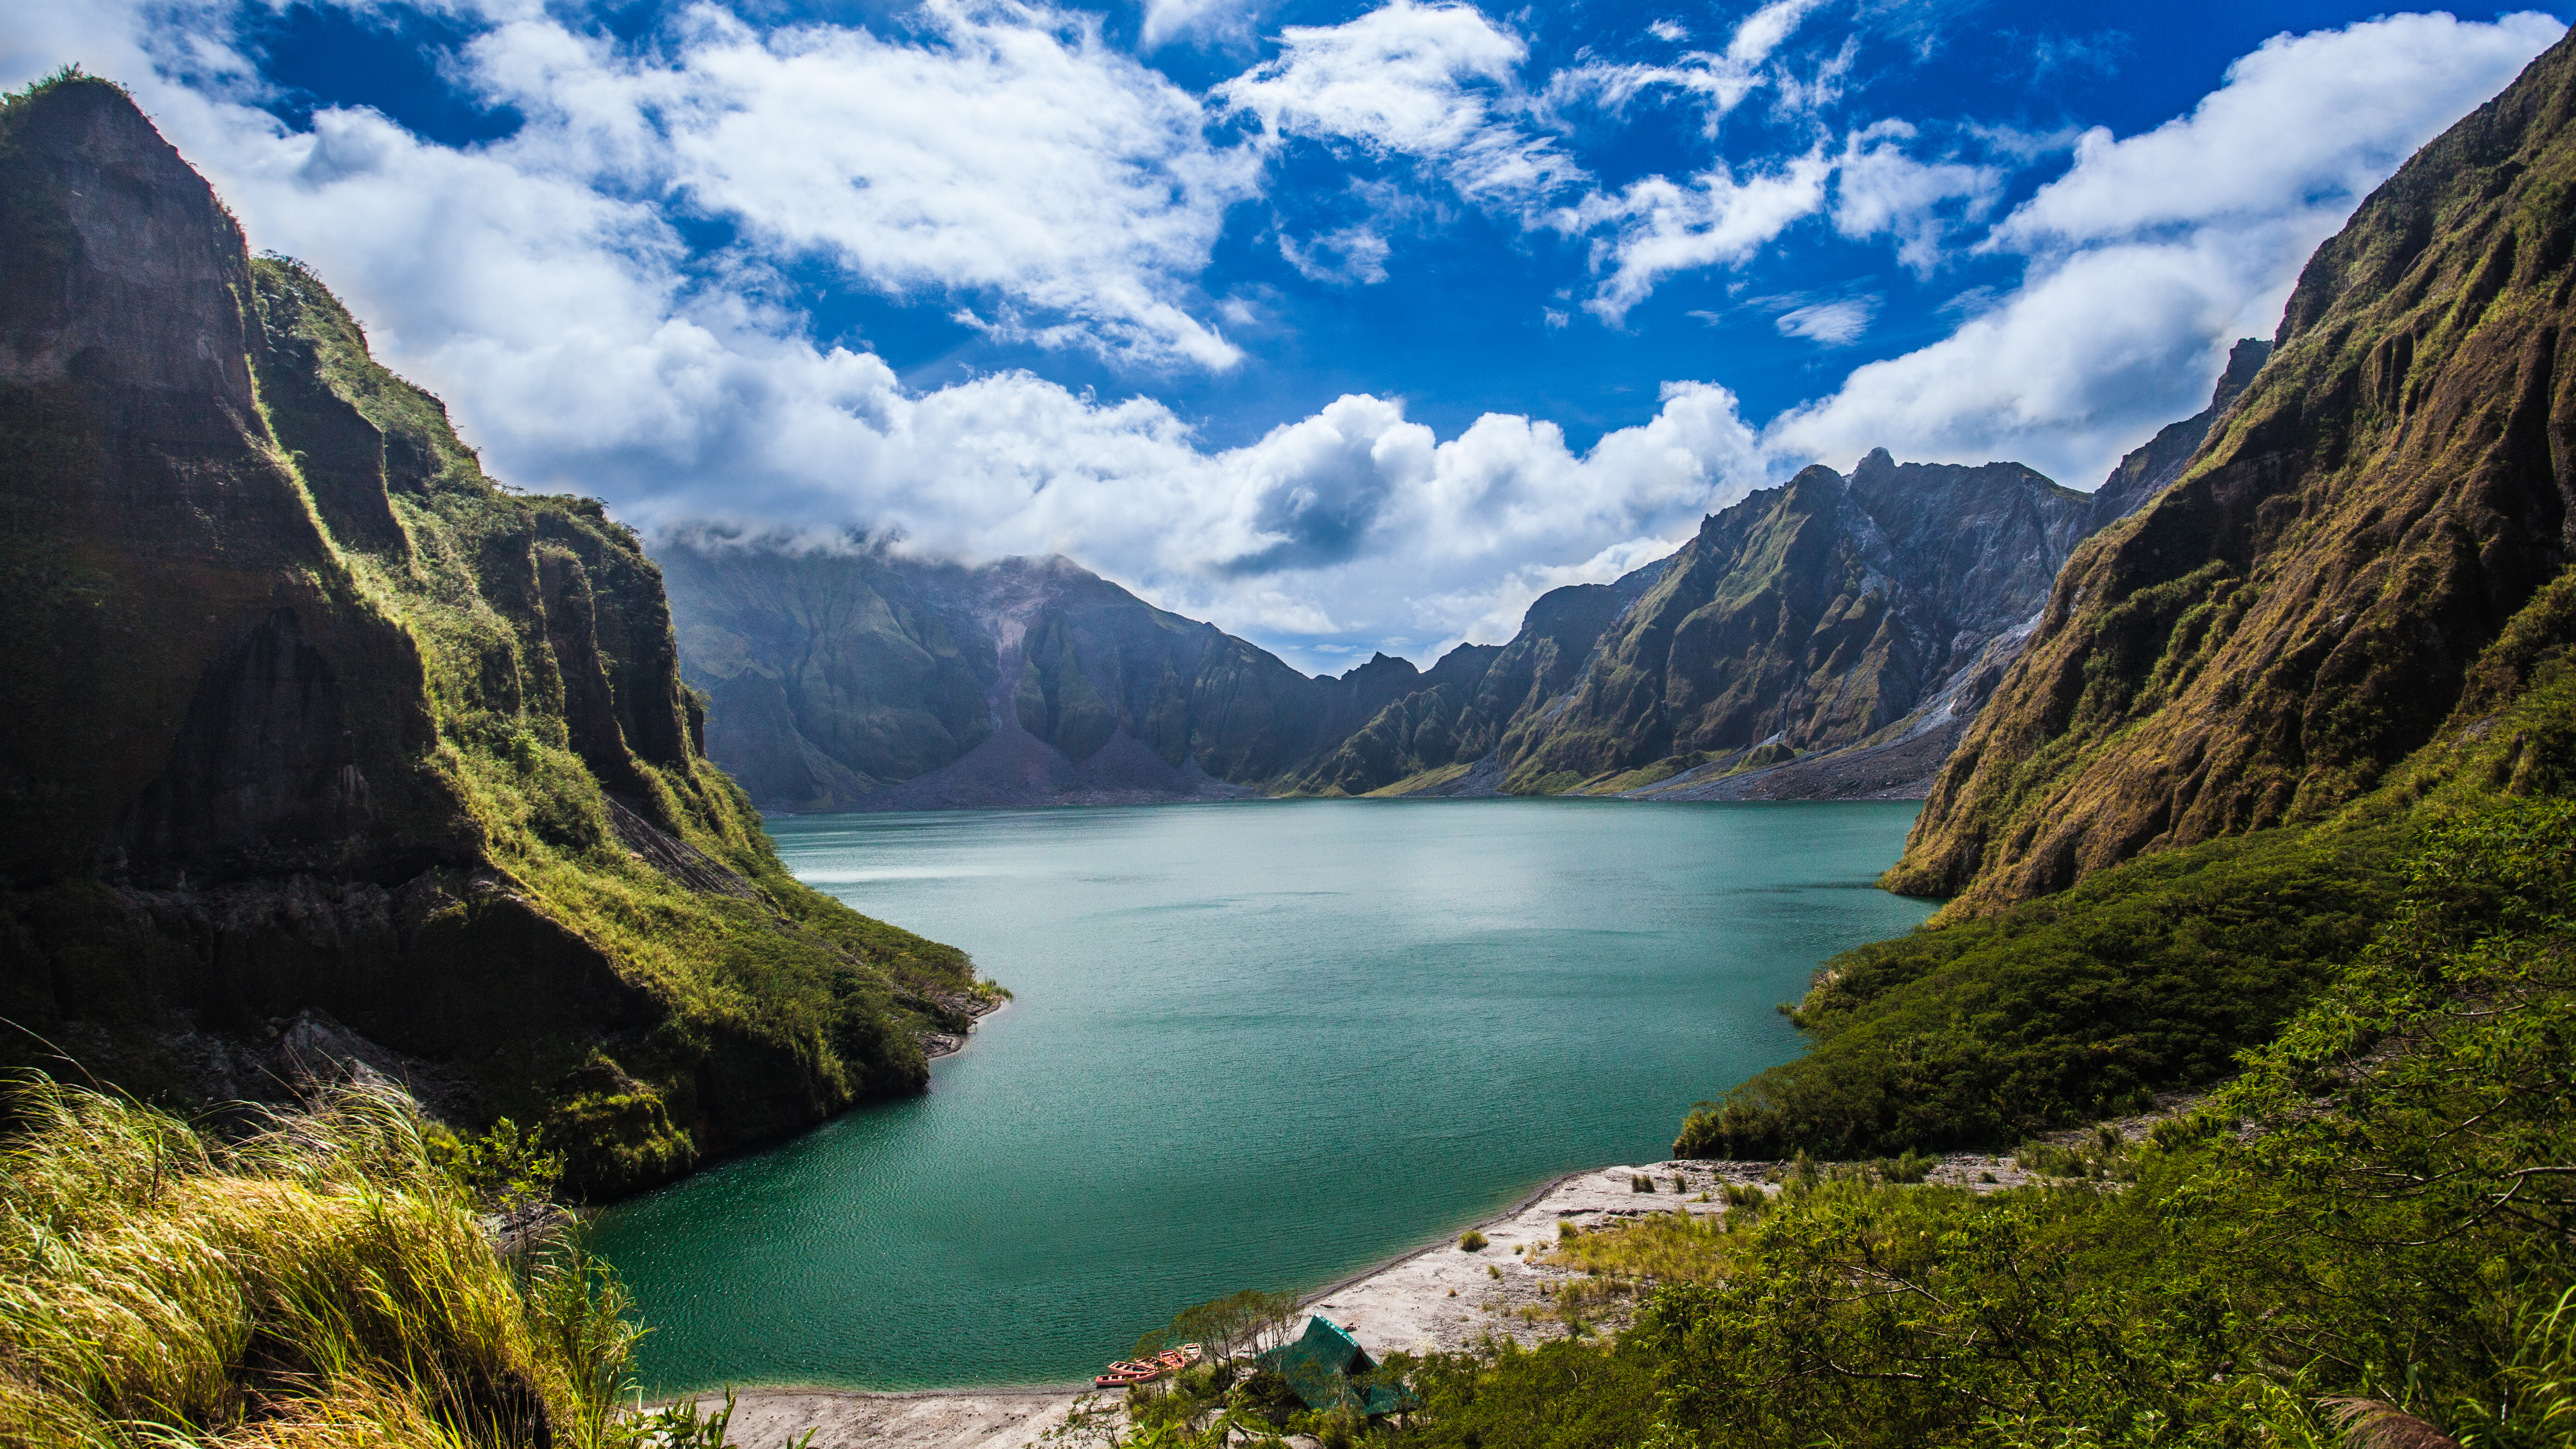 Blue waters and green landscape in Mount Pinatubo Crater Lake